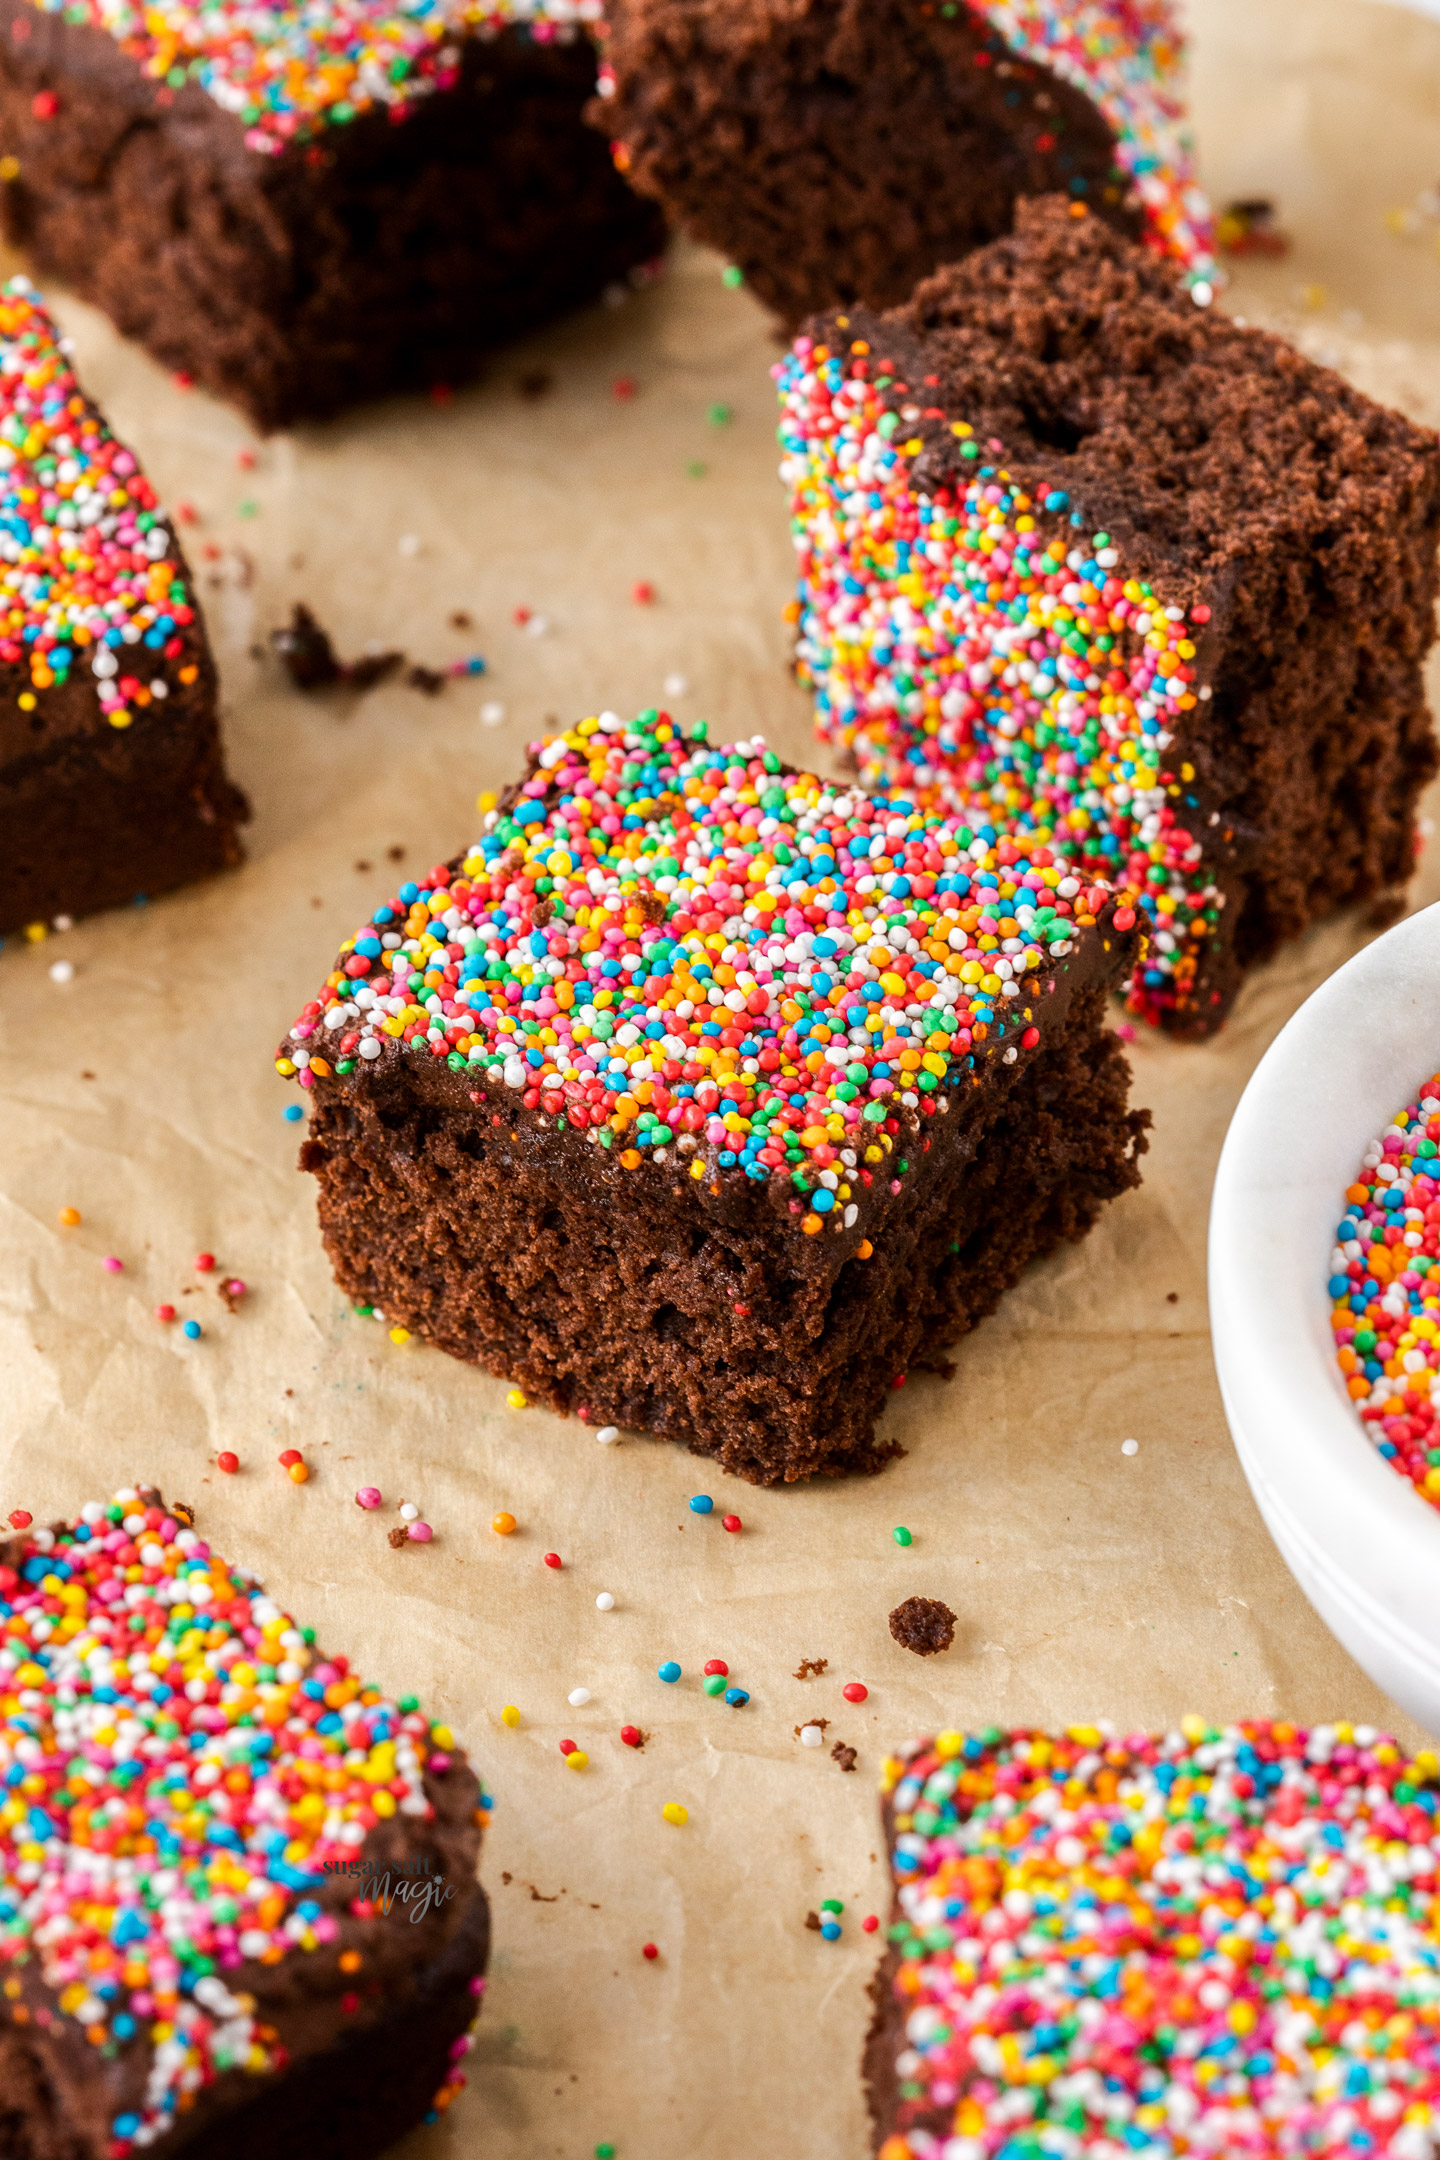 Squares of chocolate cake, covered in sprinkles.